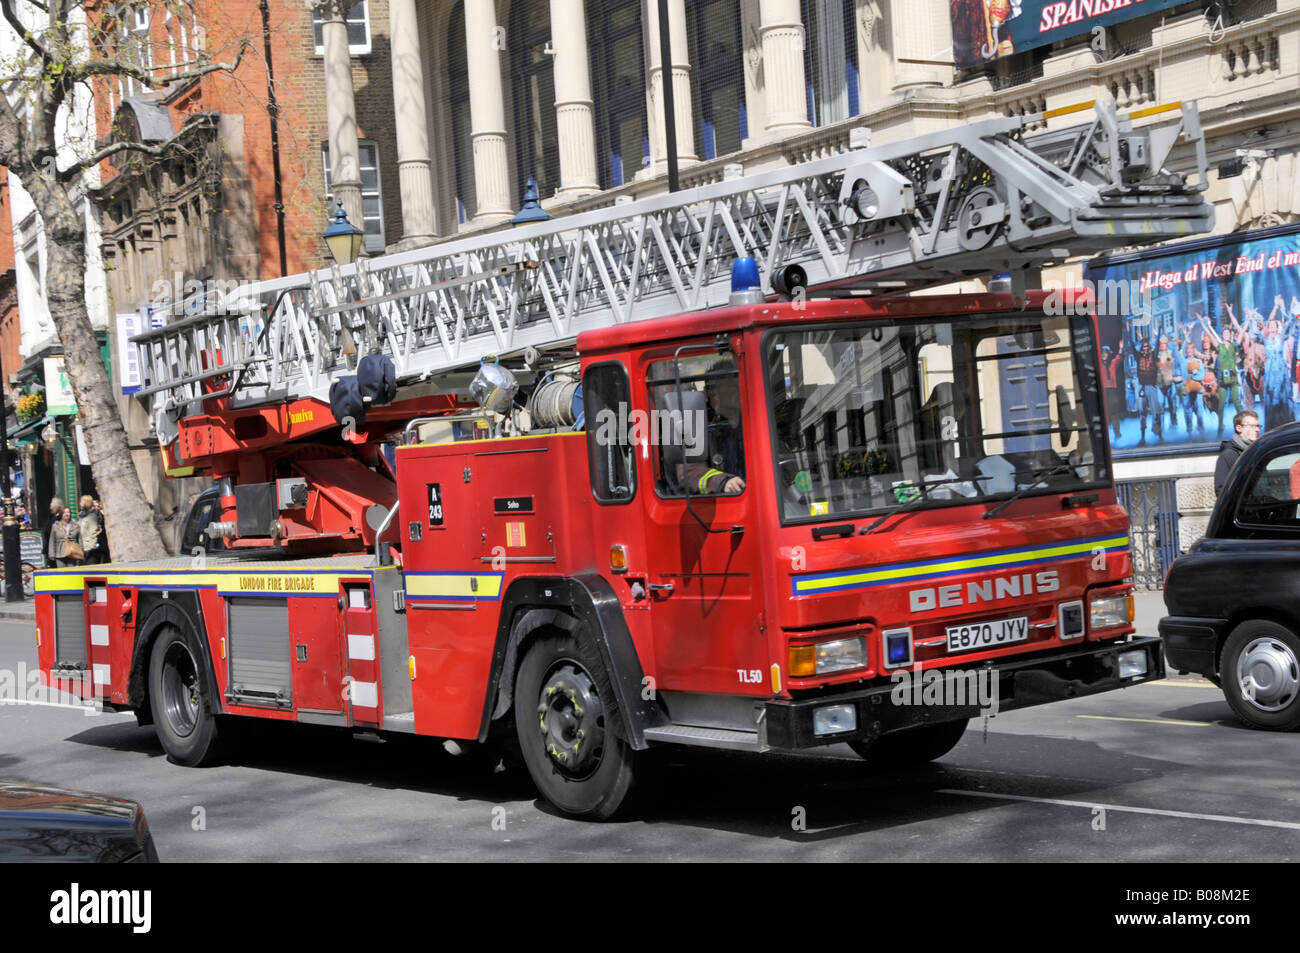 Alexander Dennis turntable ladder red fire engine vehicle front side view driving along road on 999 emergency call West End London England UK Stock Photo